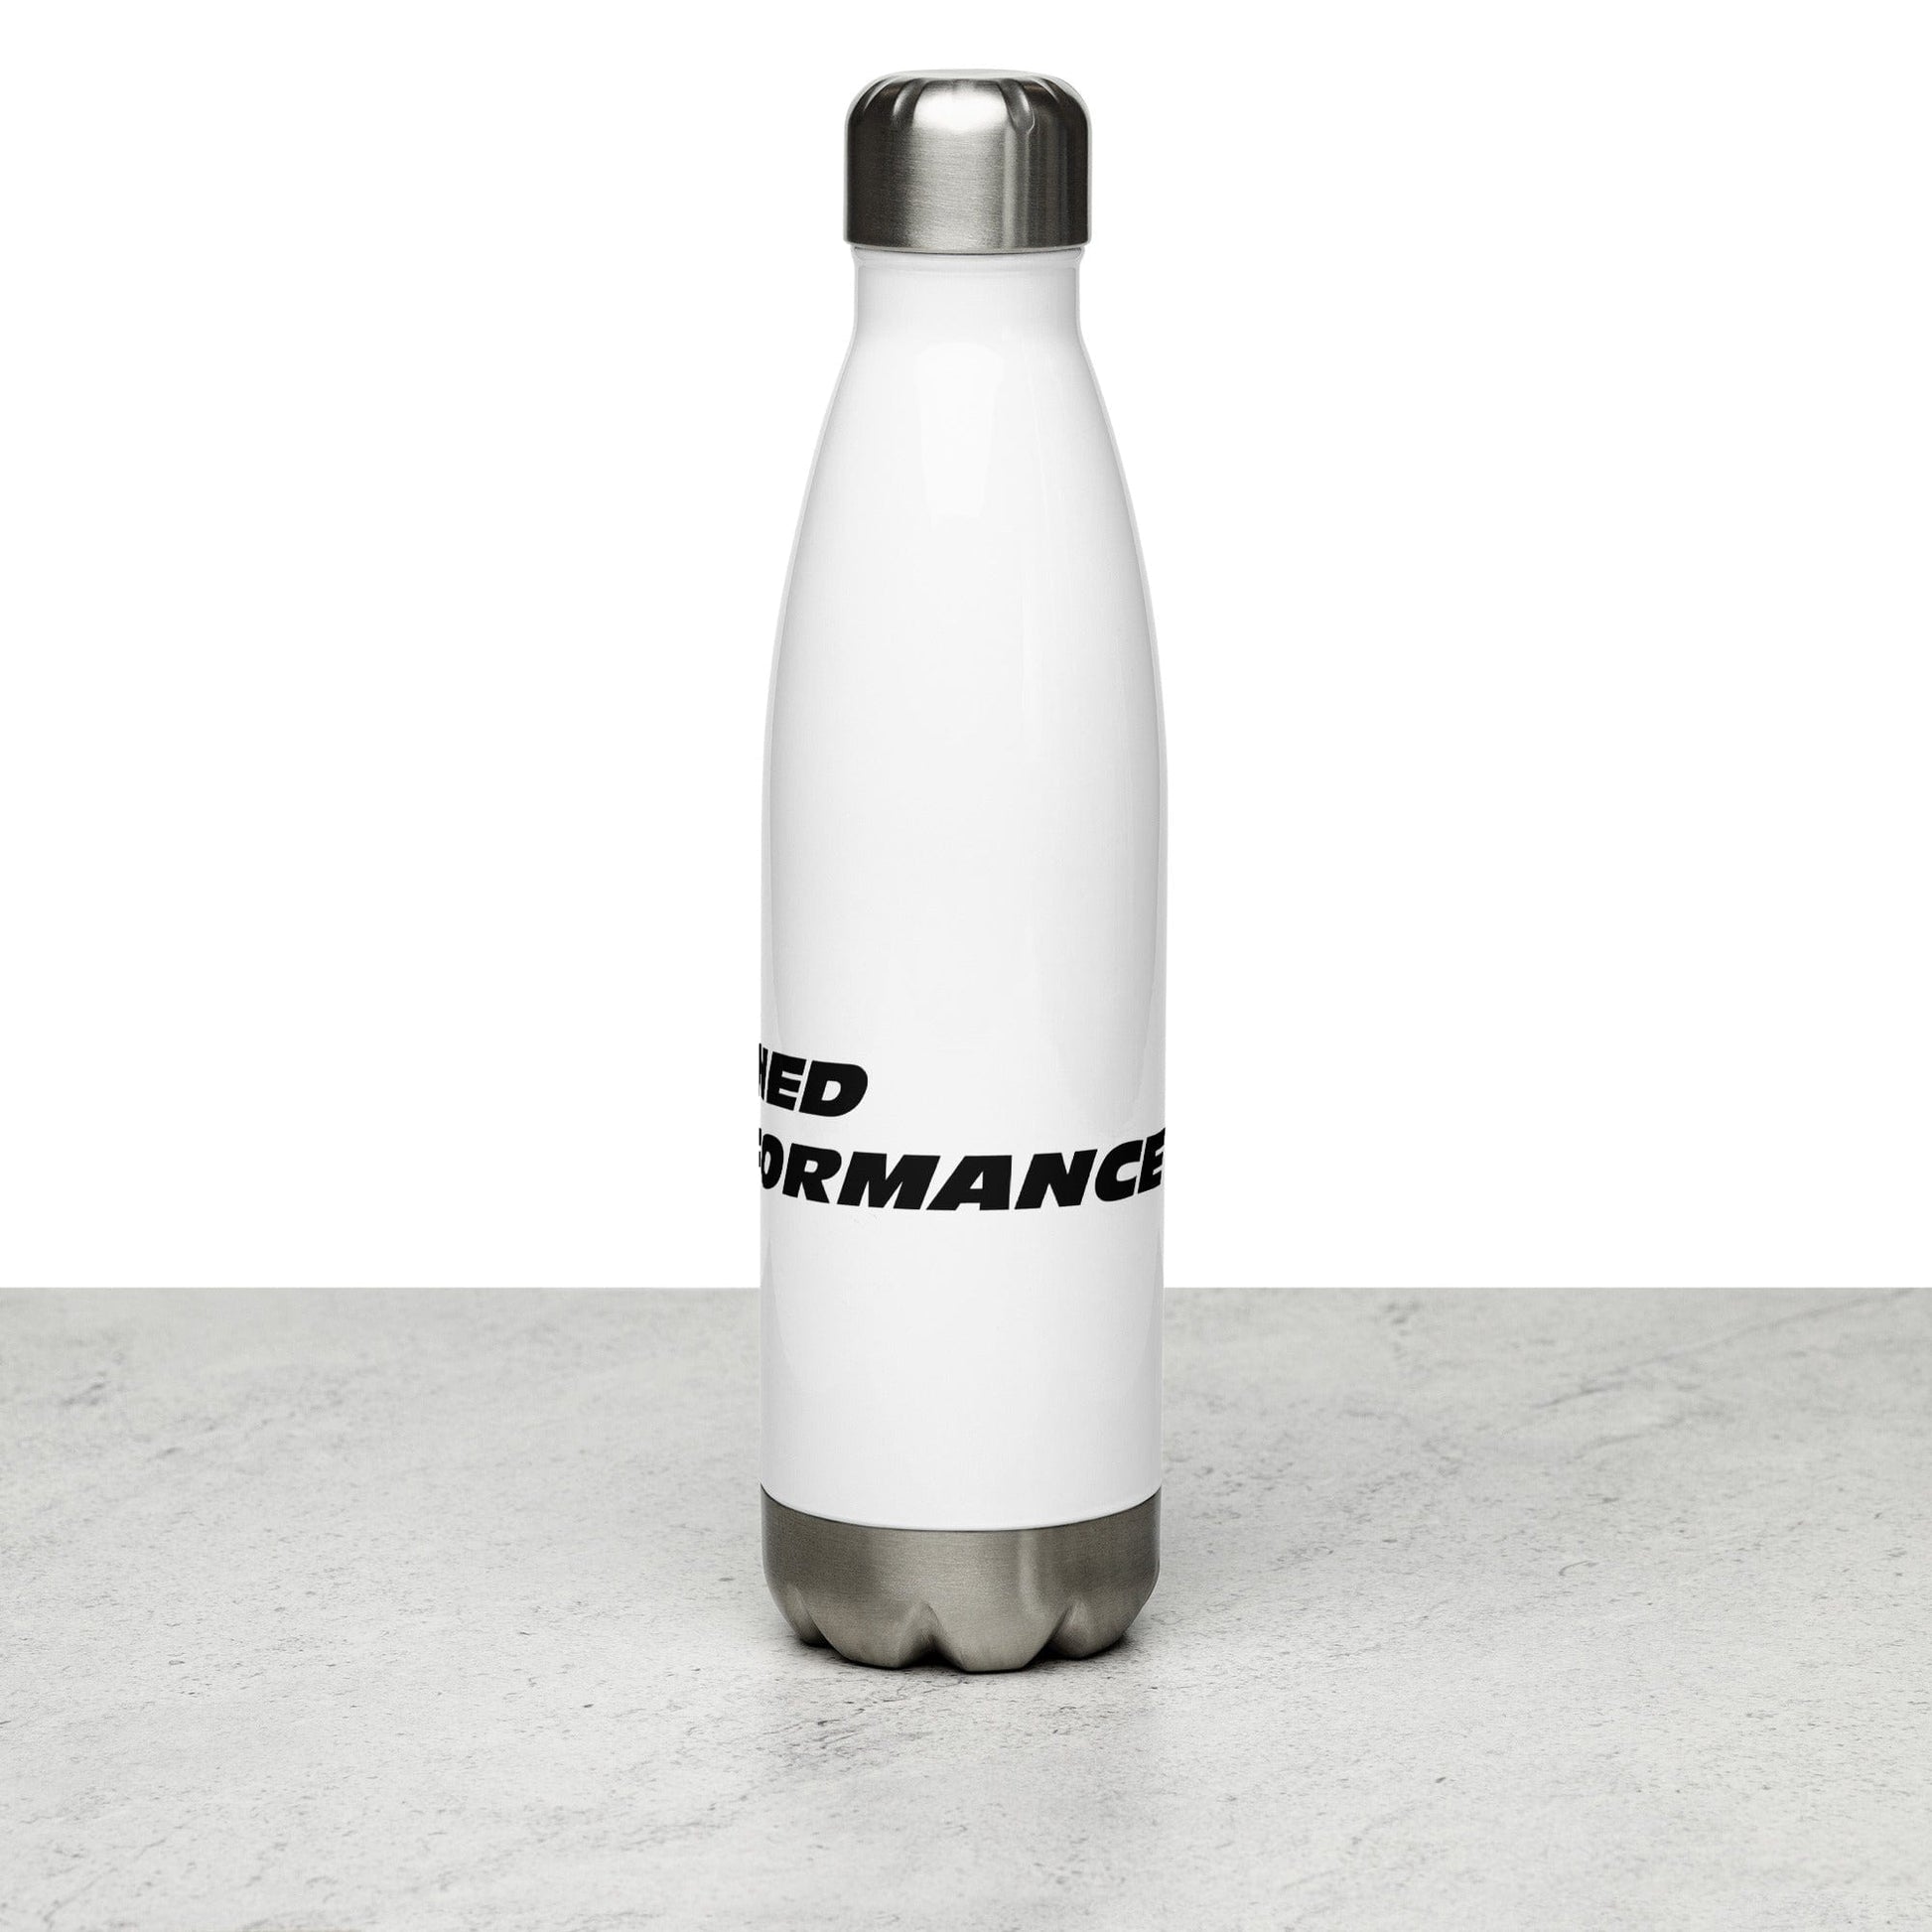 17oz Black and White RP Stainless Steel Water Bottle RENICK PERFORMANCE